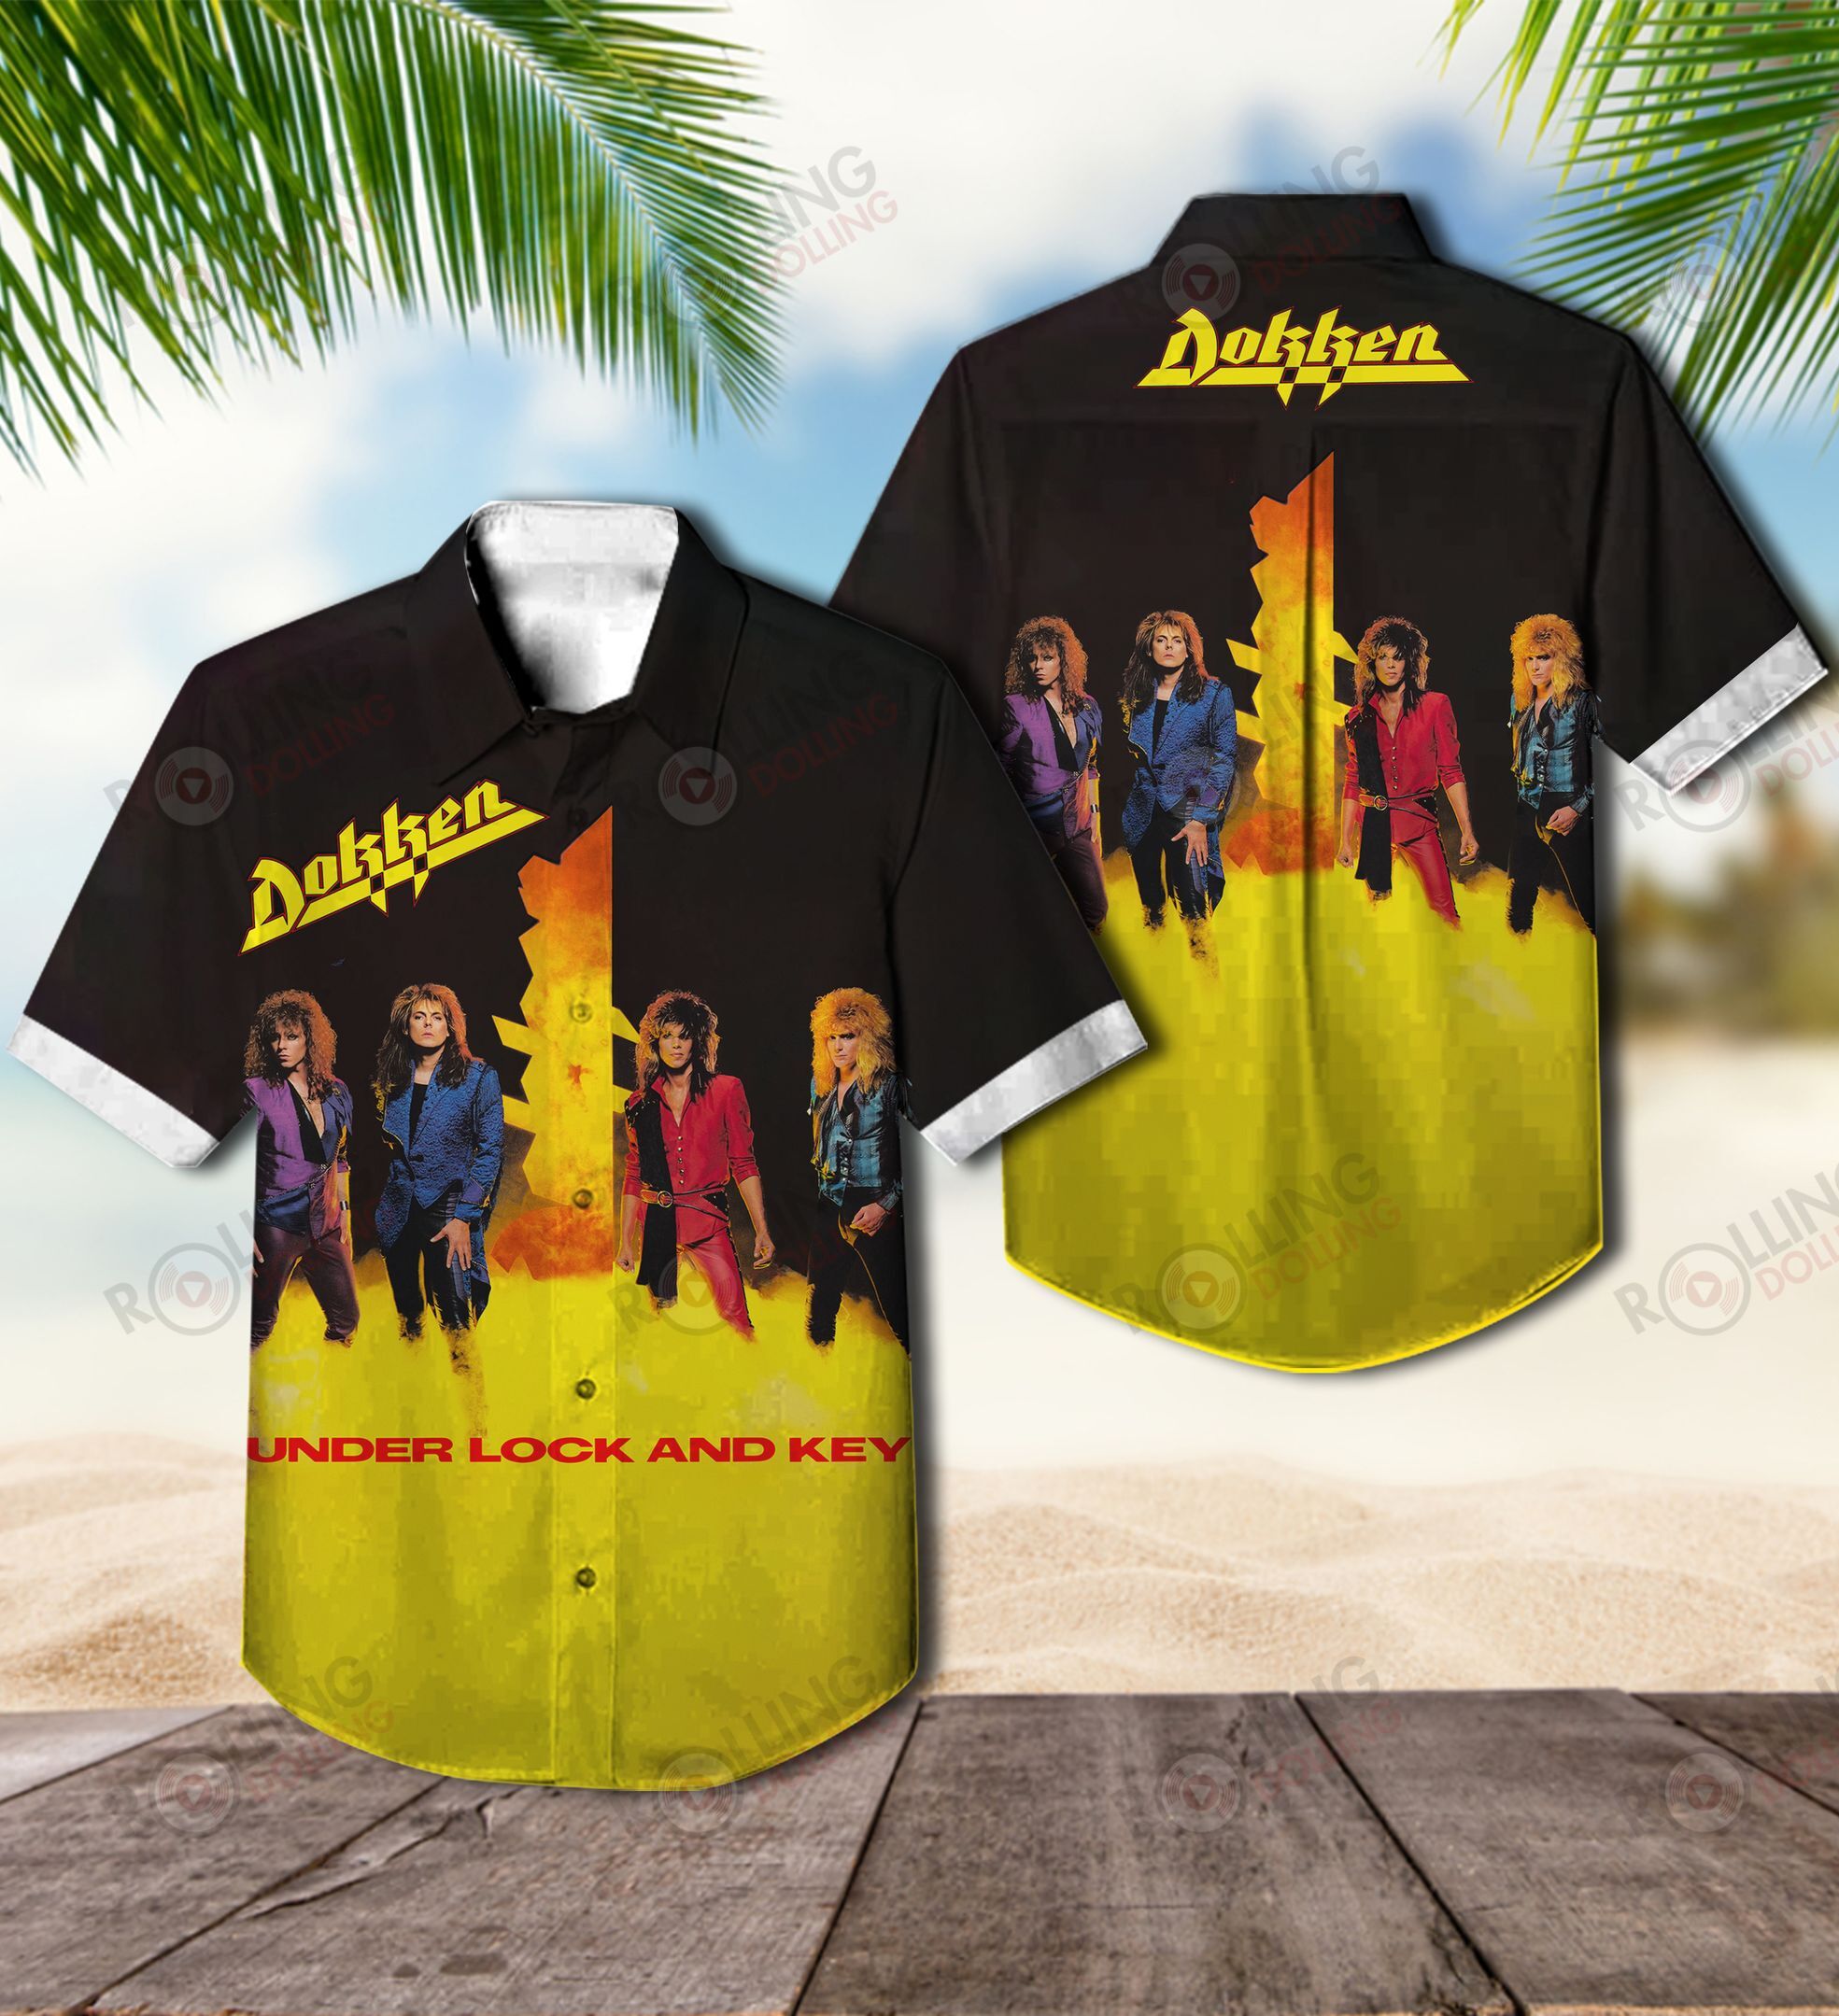 This would make a great gift for any fan who loves Hawaiian Shirt as well as Rock band 3